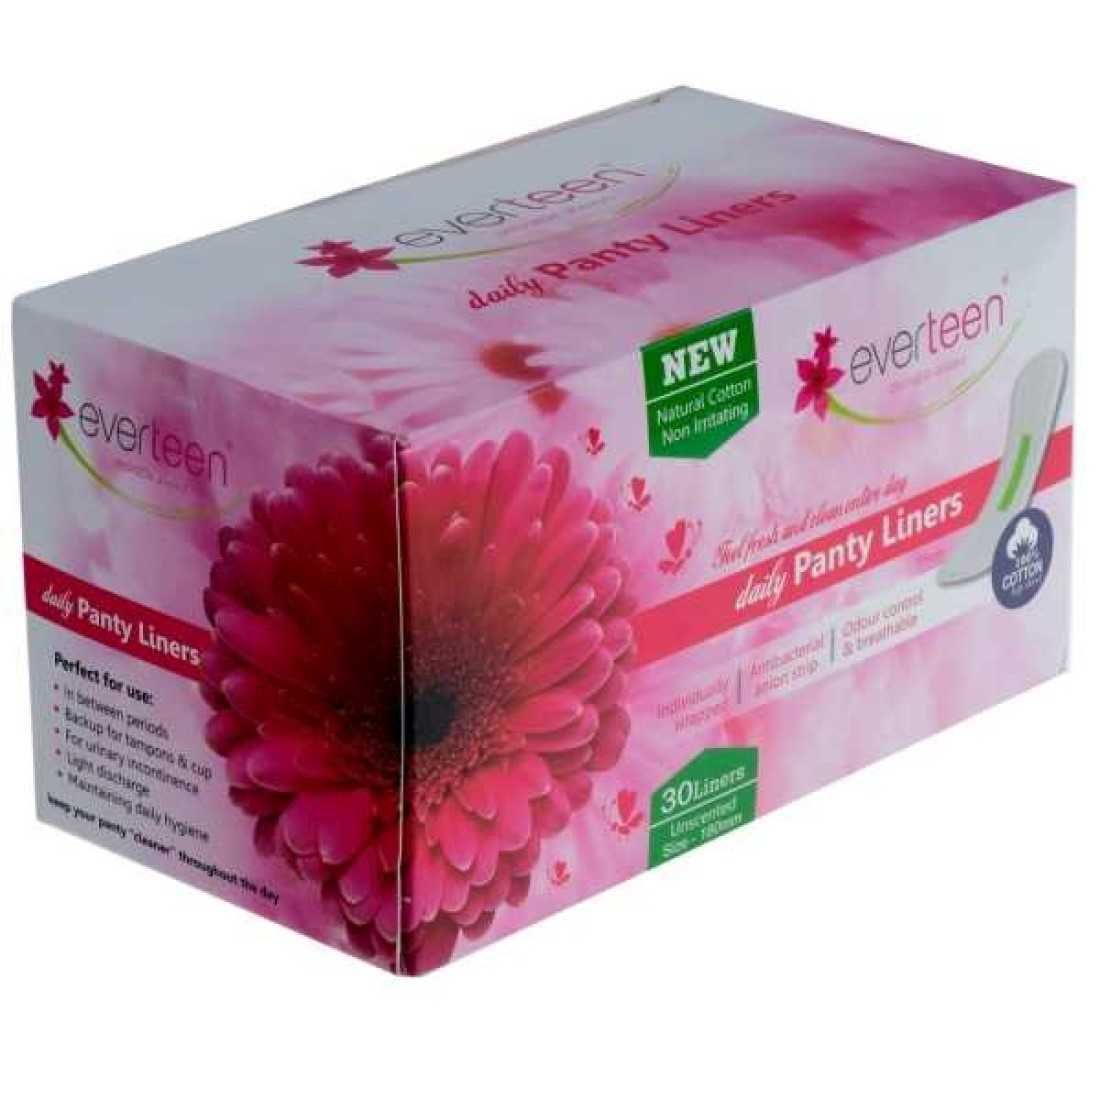 Buy everteen Daily Panty Liners With Antibacterial Strip for Light  Discharge & Leakage in Women - 1 Pack (30 pcs) Online